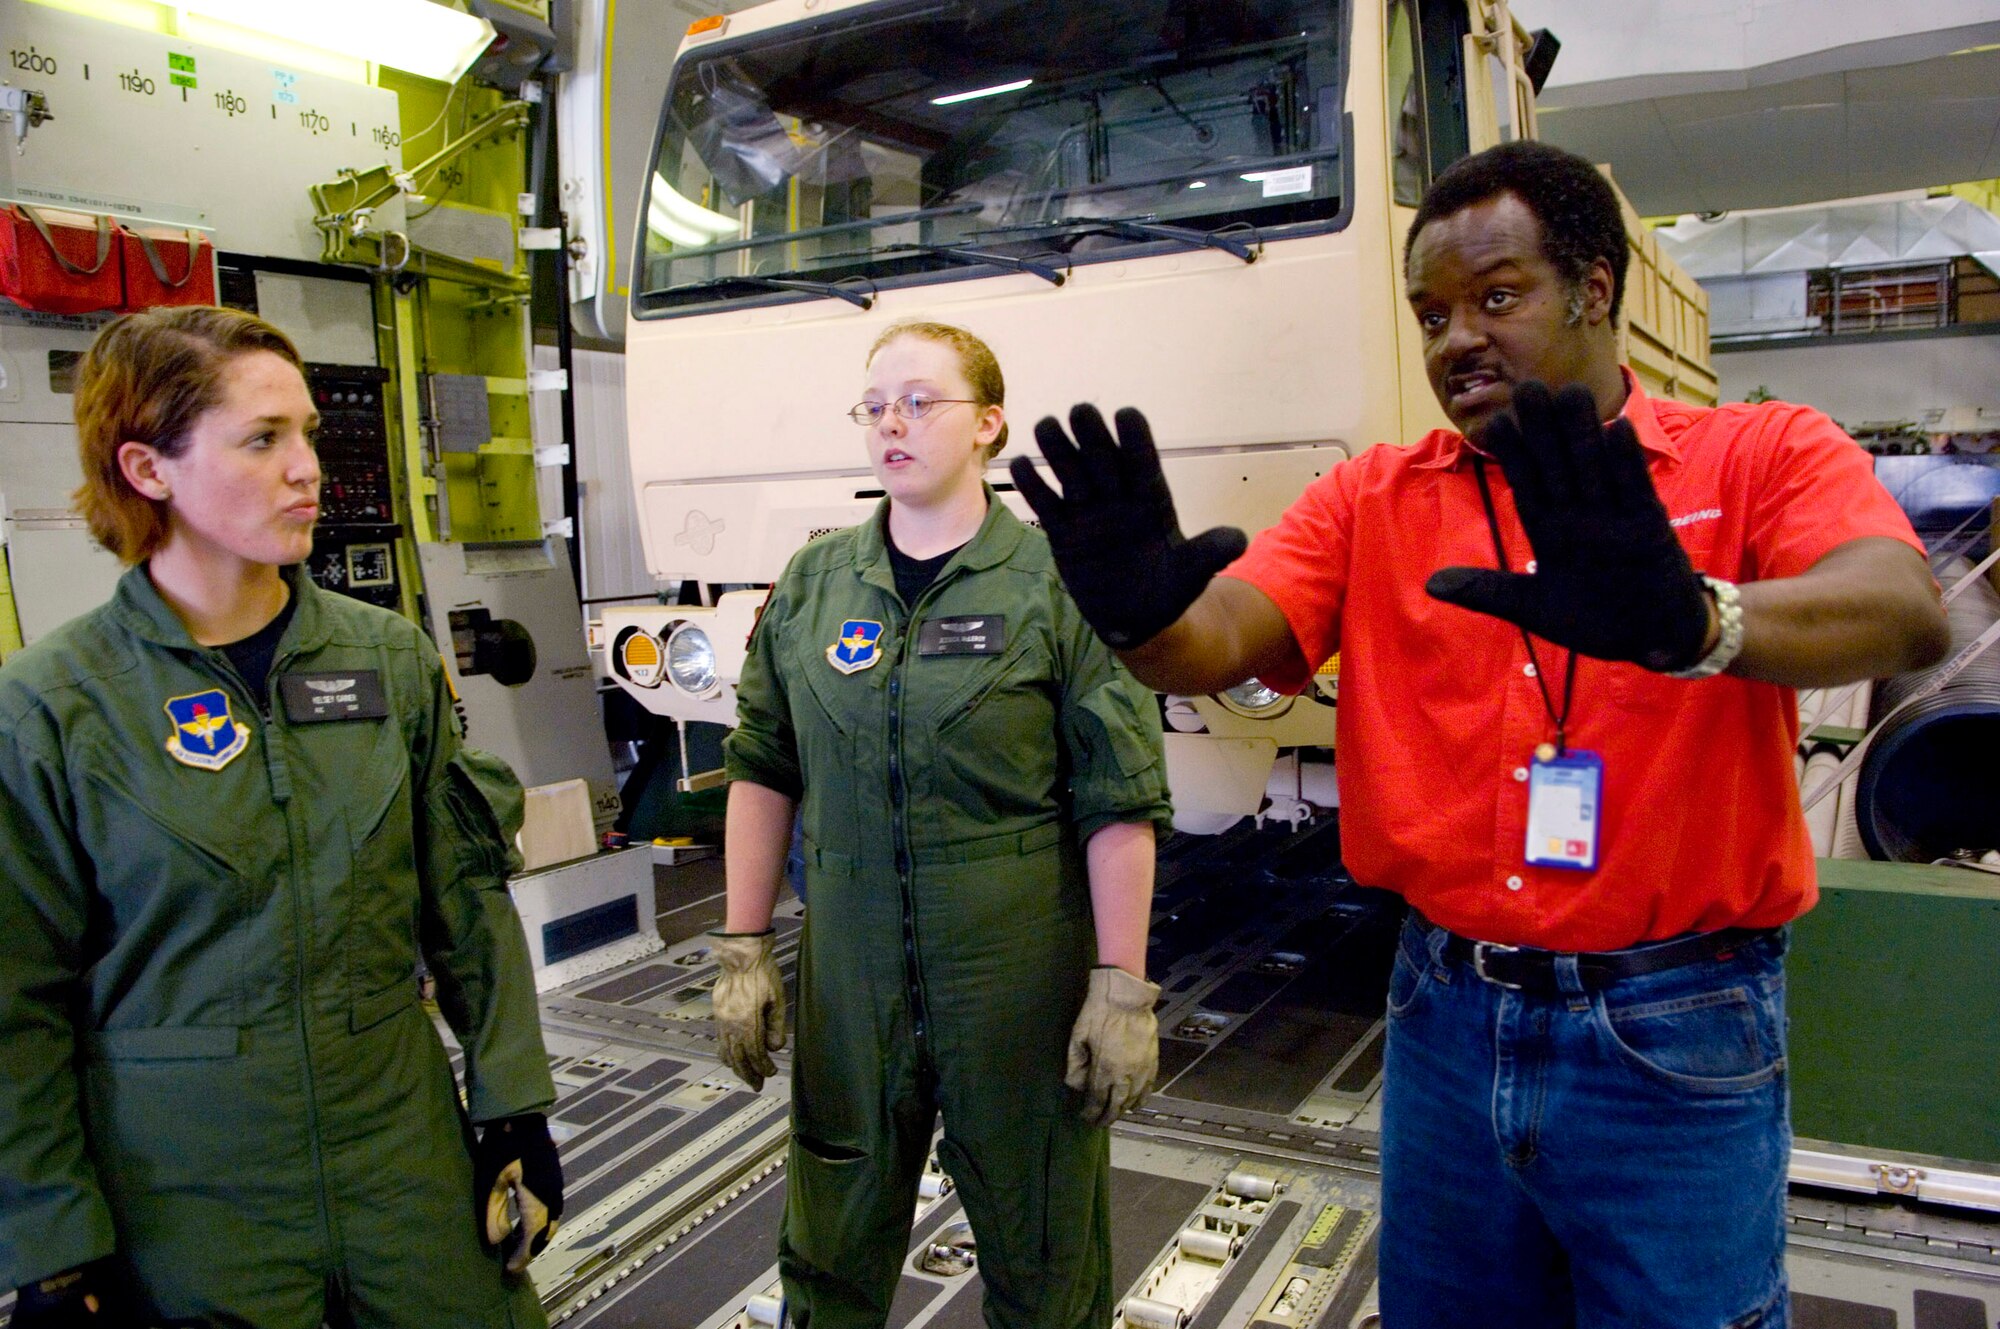 Howard Thagard, a loadmaster instructor with the C-17 Globemaster III aircrew training system instructs loadmaster students Airmen 1st Class Kelsey Gainer (left) and Jessica McLeroy in an $18 million cargo compartment trainer at Altus Air Force Base, Okla. Inside the simulated C-17 cargo compartment students get to try their hand at a variety of loads, to include pallets, vehicles, helicopters, heavy equipment and aeromedical set-ups. (U.S. Air Force photo/Tech. Sgt. Matt Hannen)
